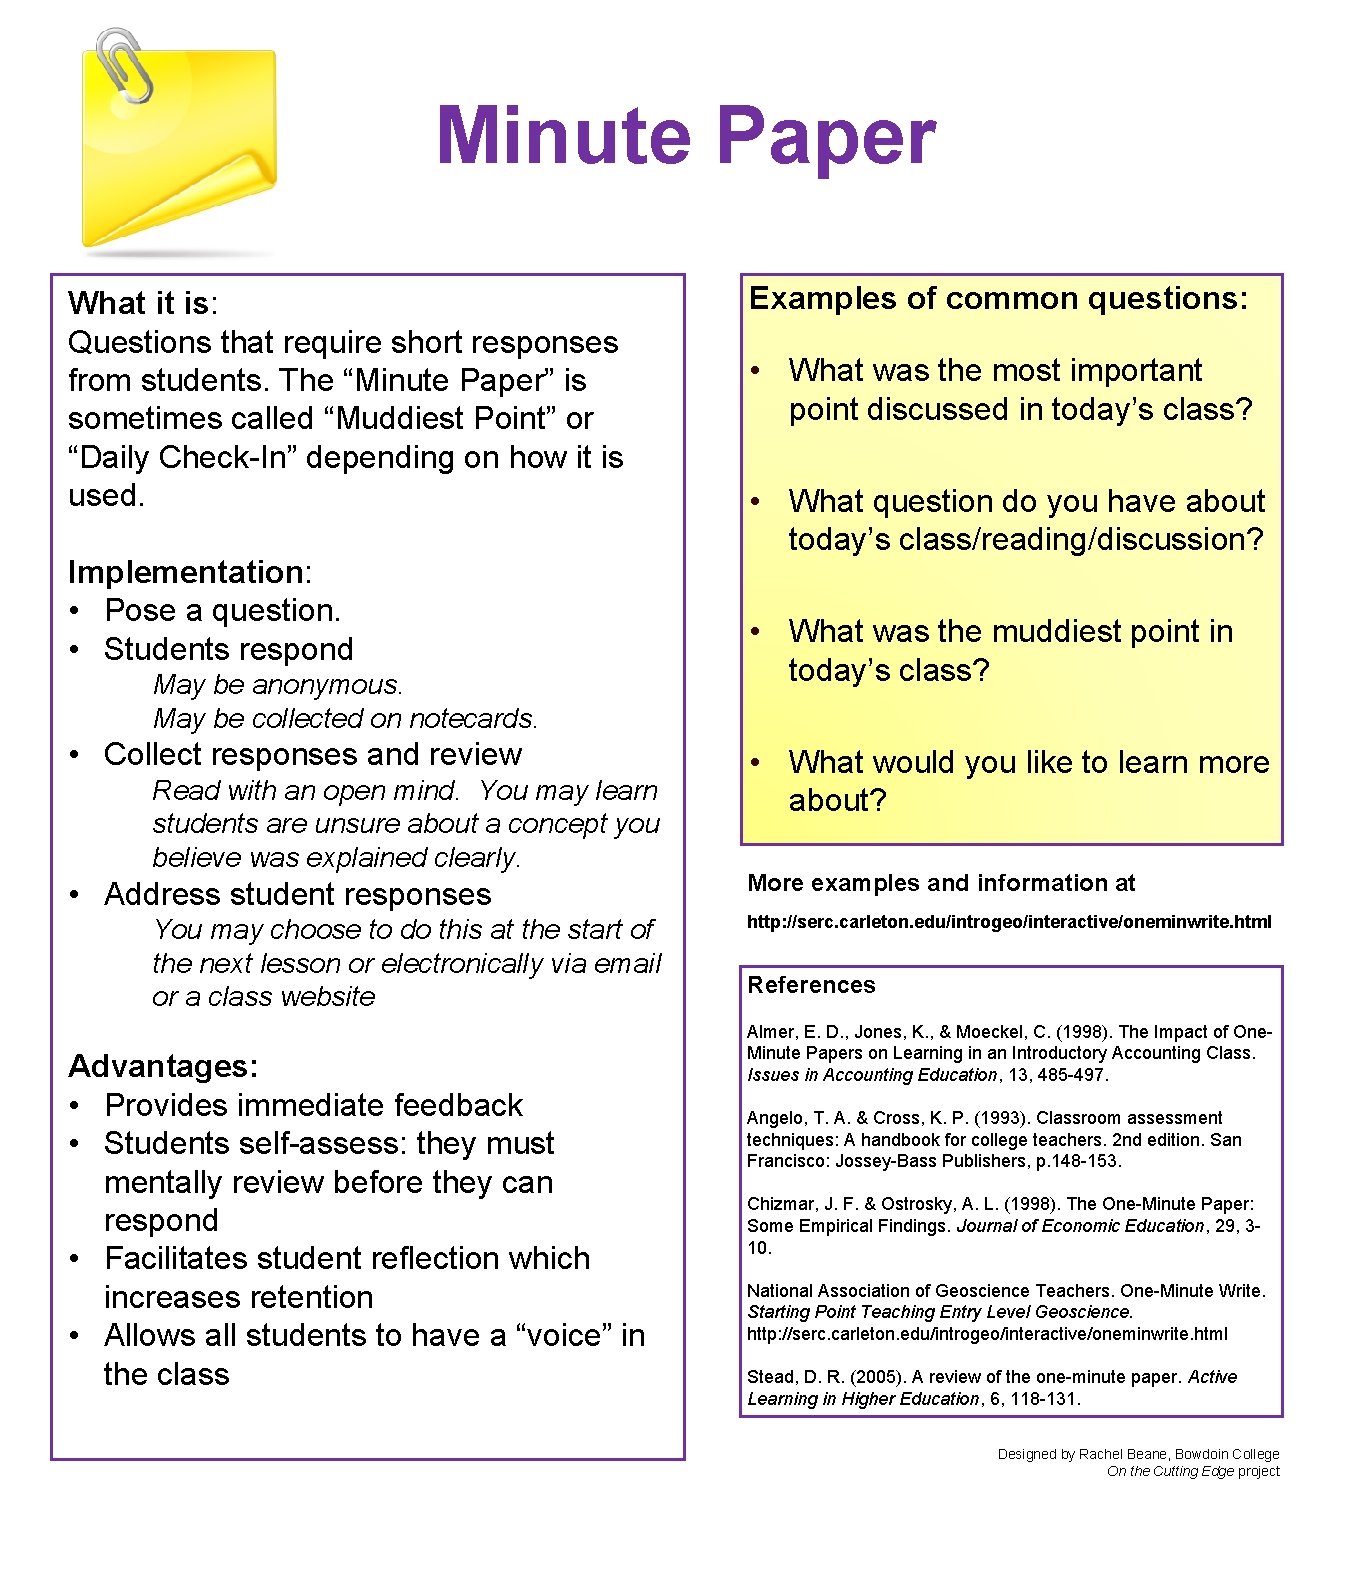 Minute Paper What it is: Questions that require short responses from students. The “Minute